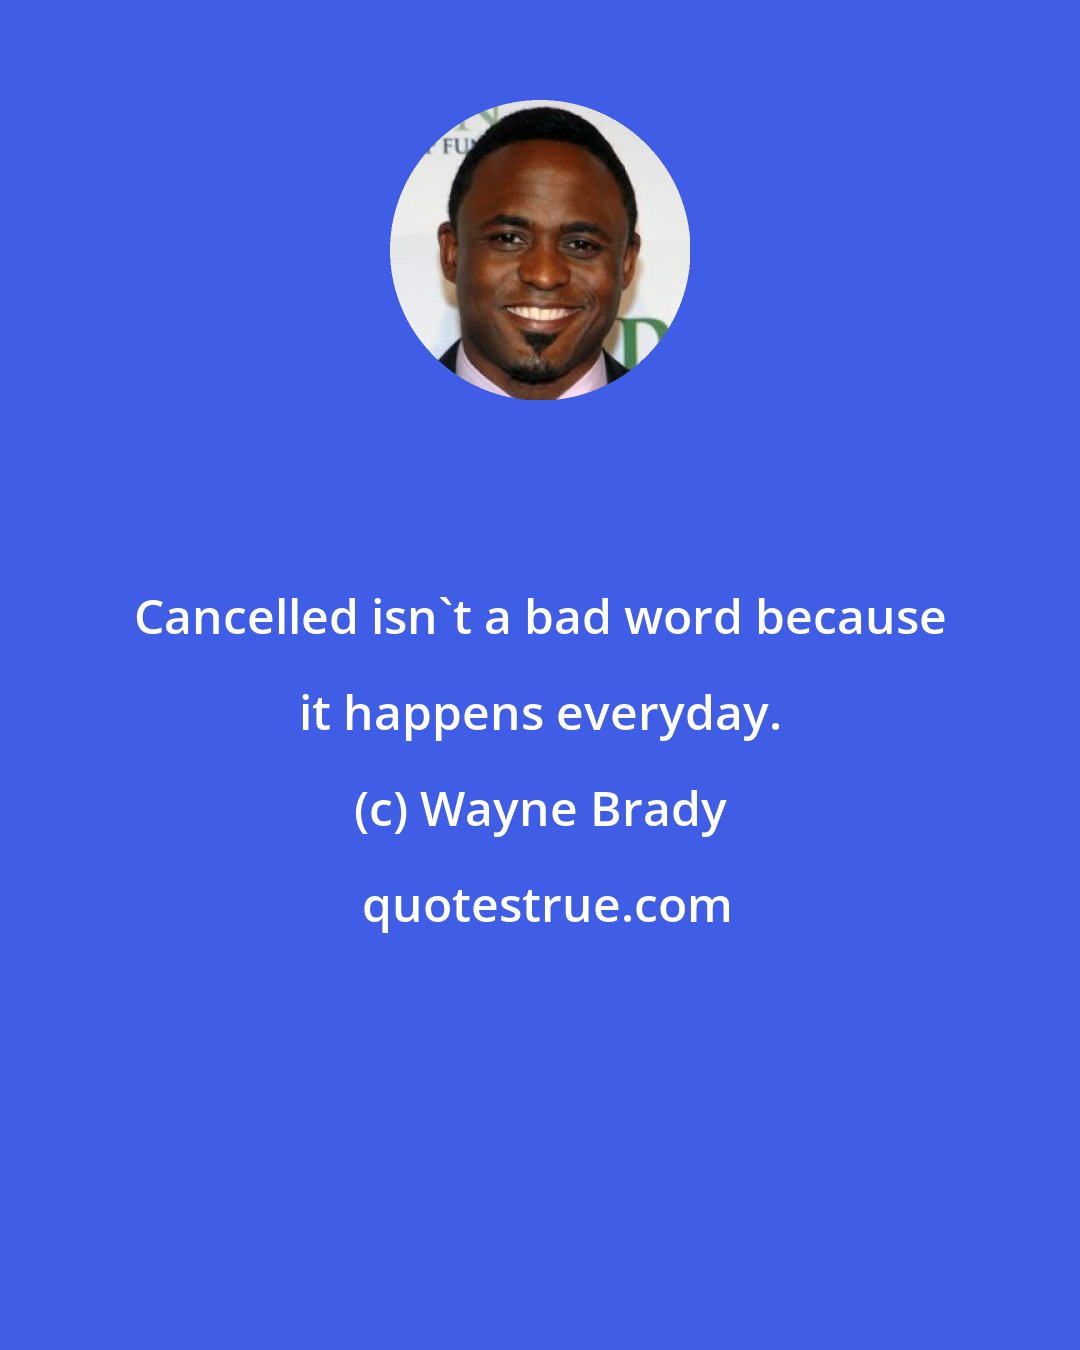 Wayne Brady: Cancelled isn't a bad word because it happens everyday.